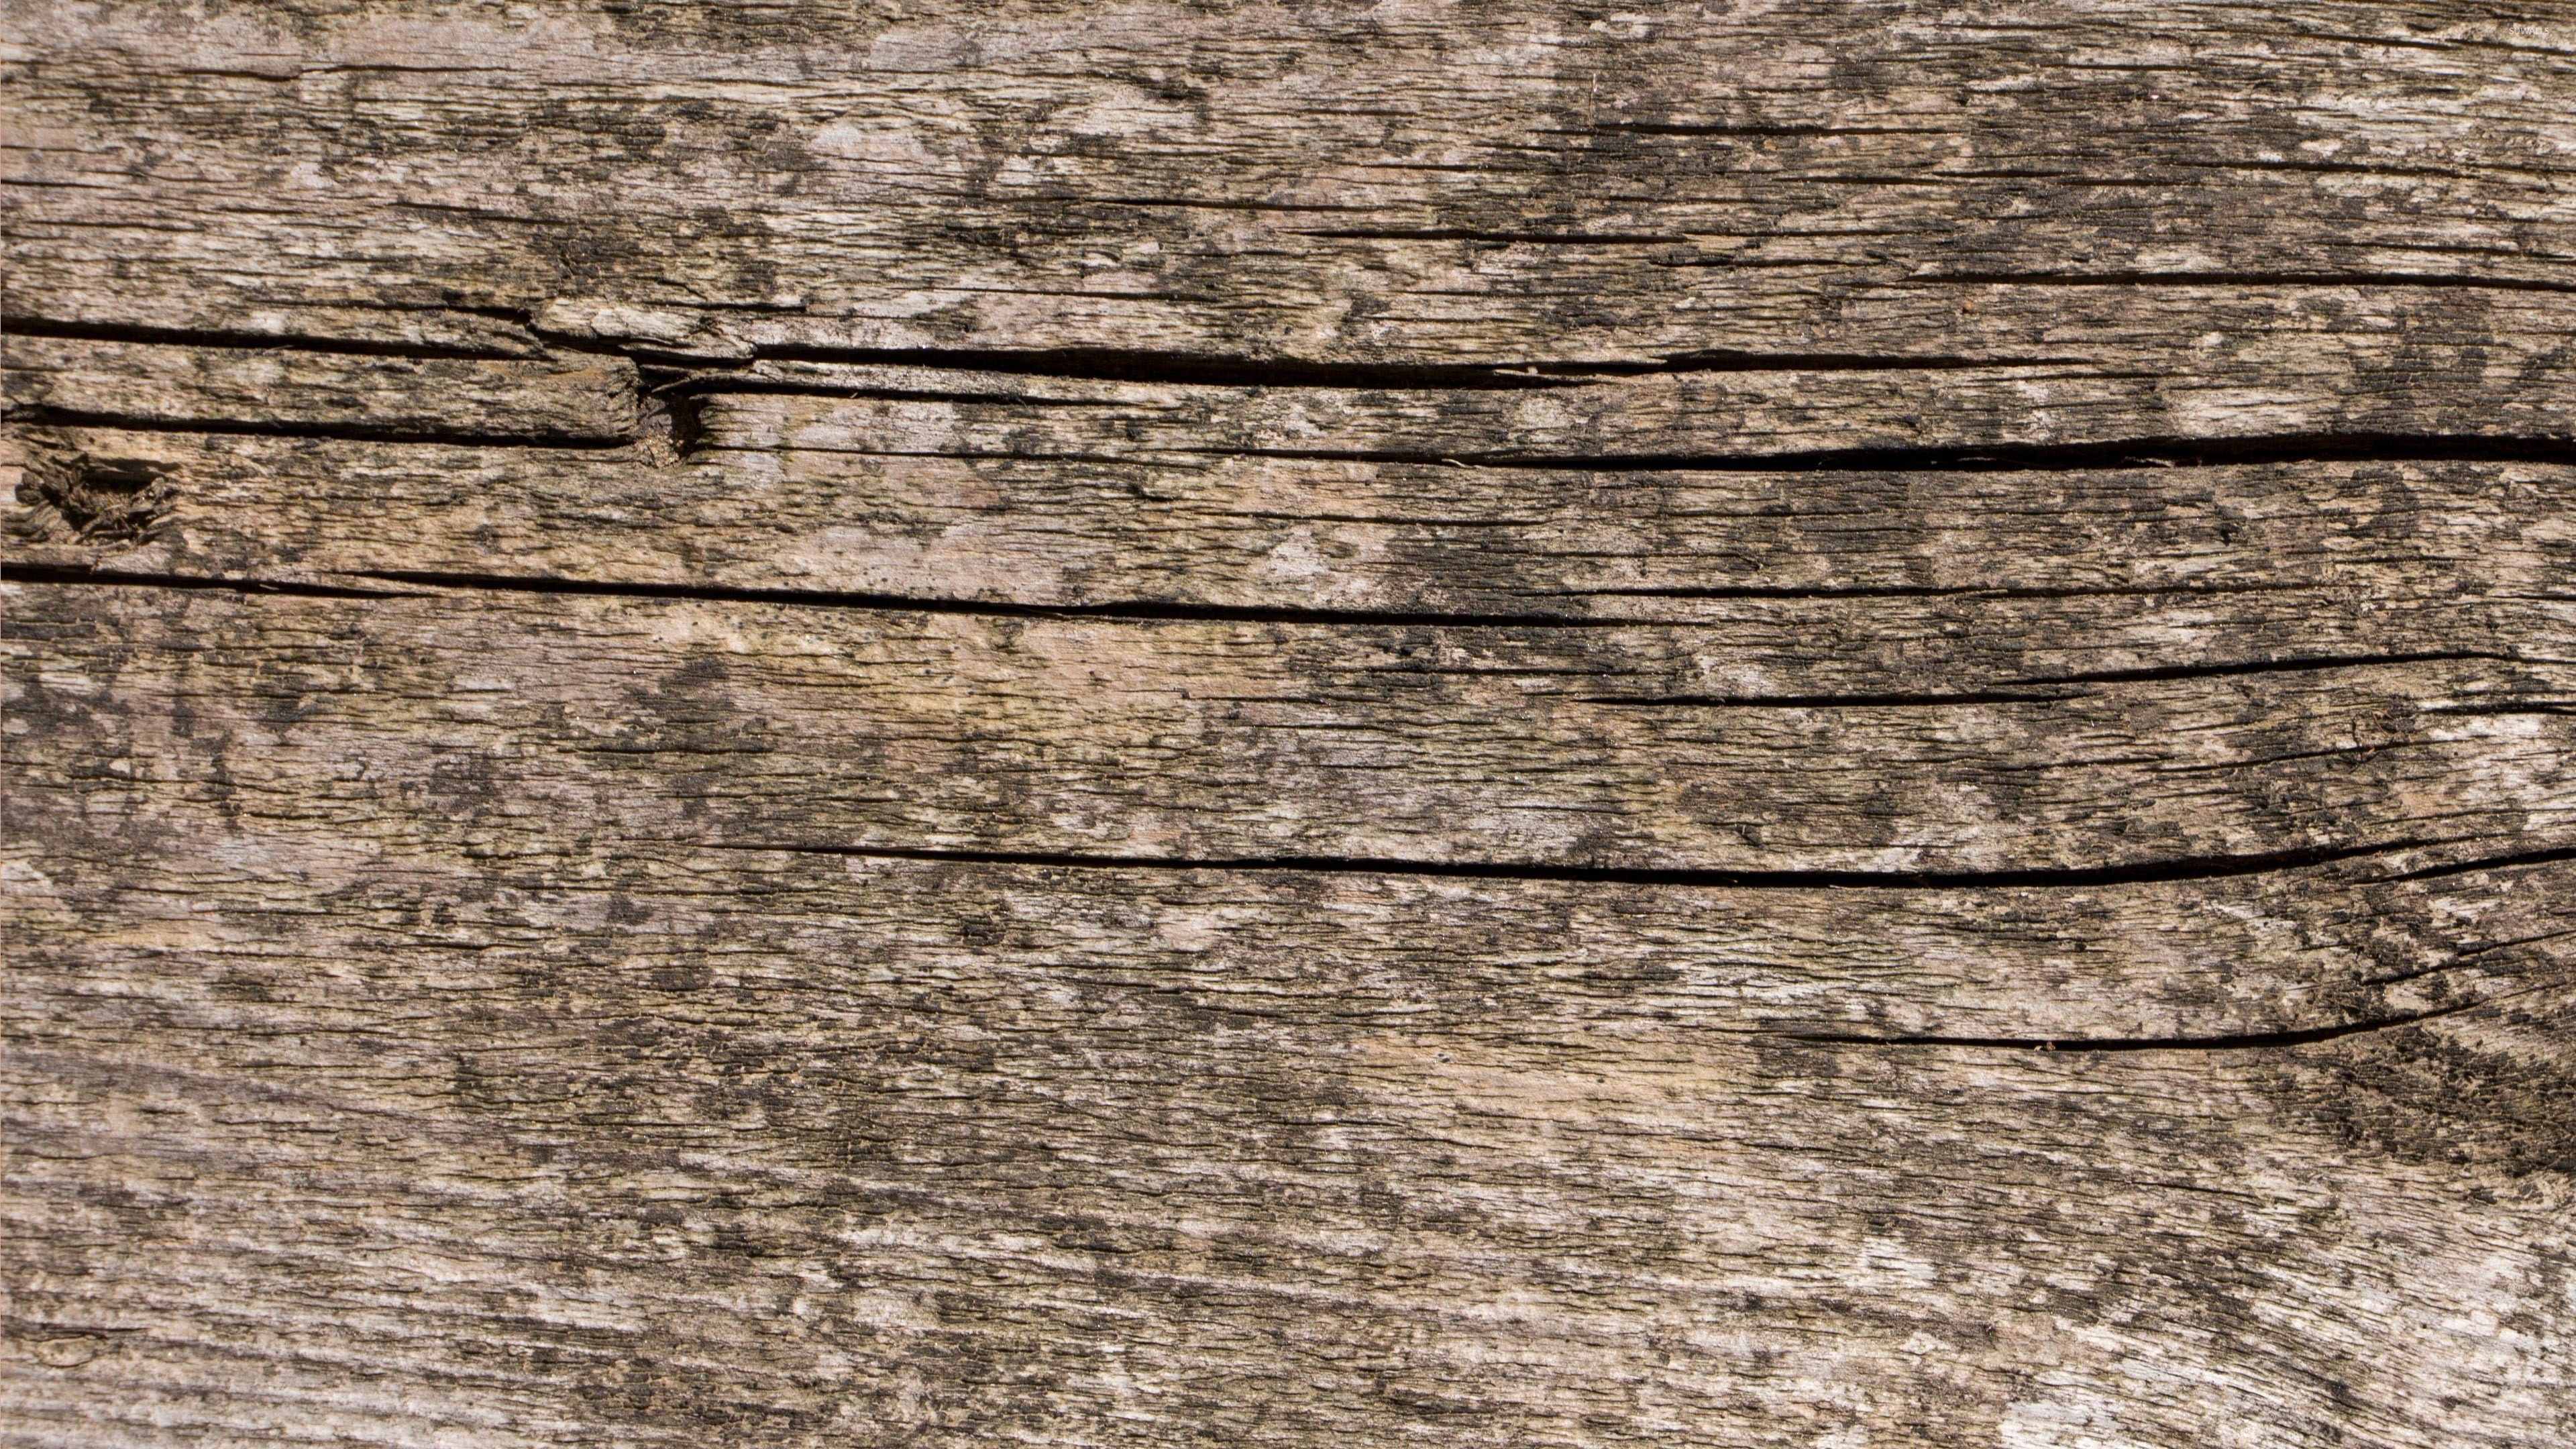 HD wallpaper, 3840X2160 4K Desktop, Vintage Charm, Photography Wallpapers, Weathered Beauty, Cracked Old Wood Wallpaper, Desktop 4K Old Wood Background Image